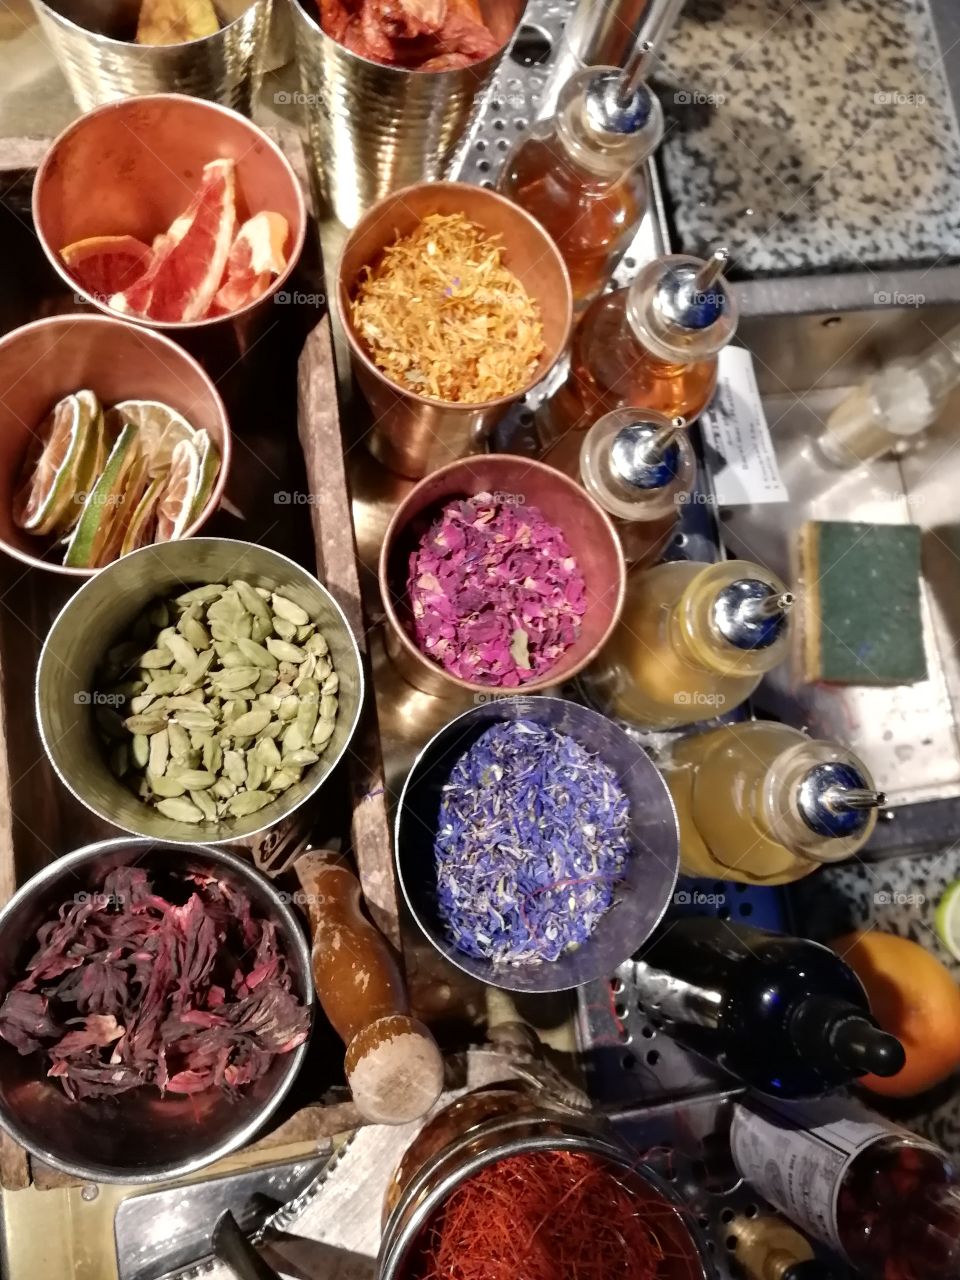 Indian spices roses lavander cardamome citrus mixology Asian drink infusion tea